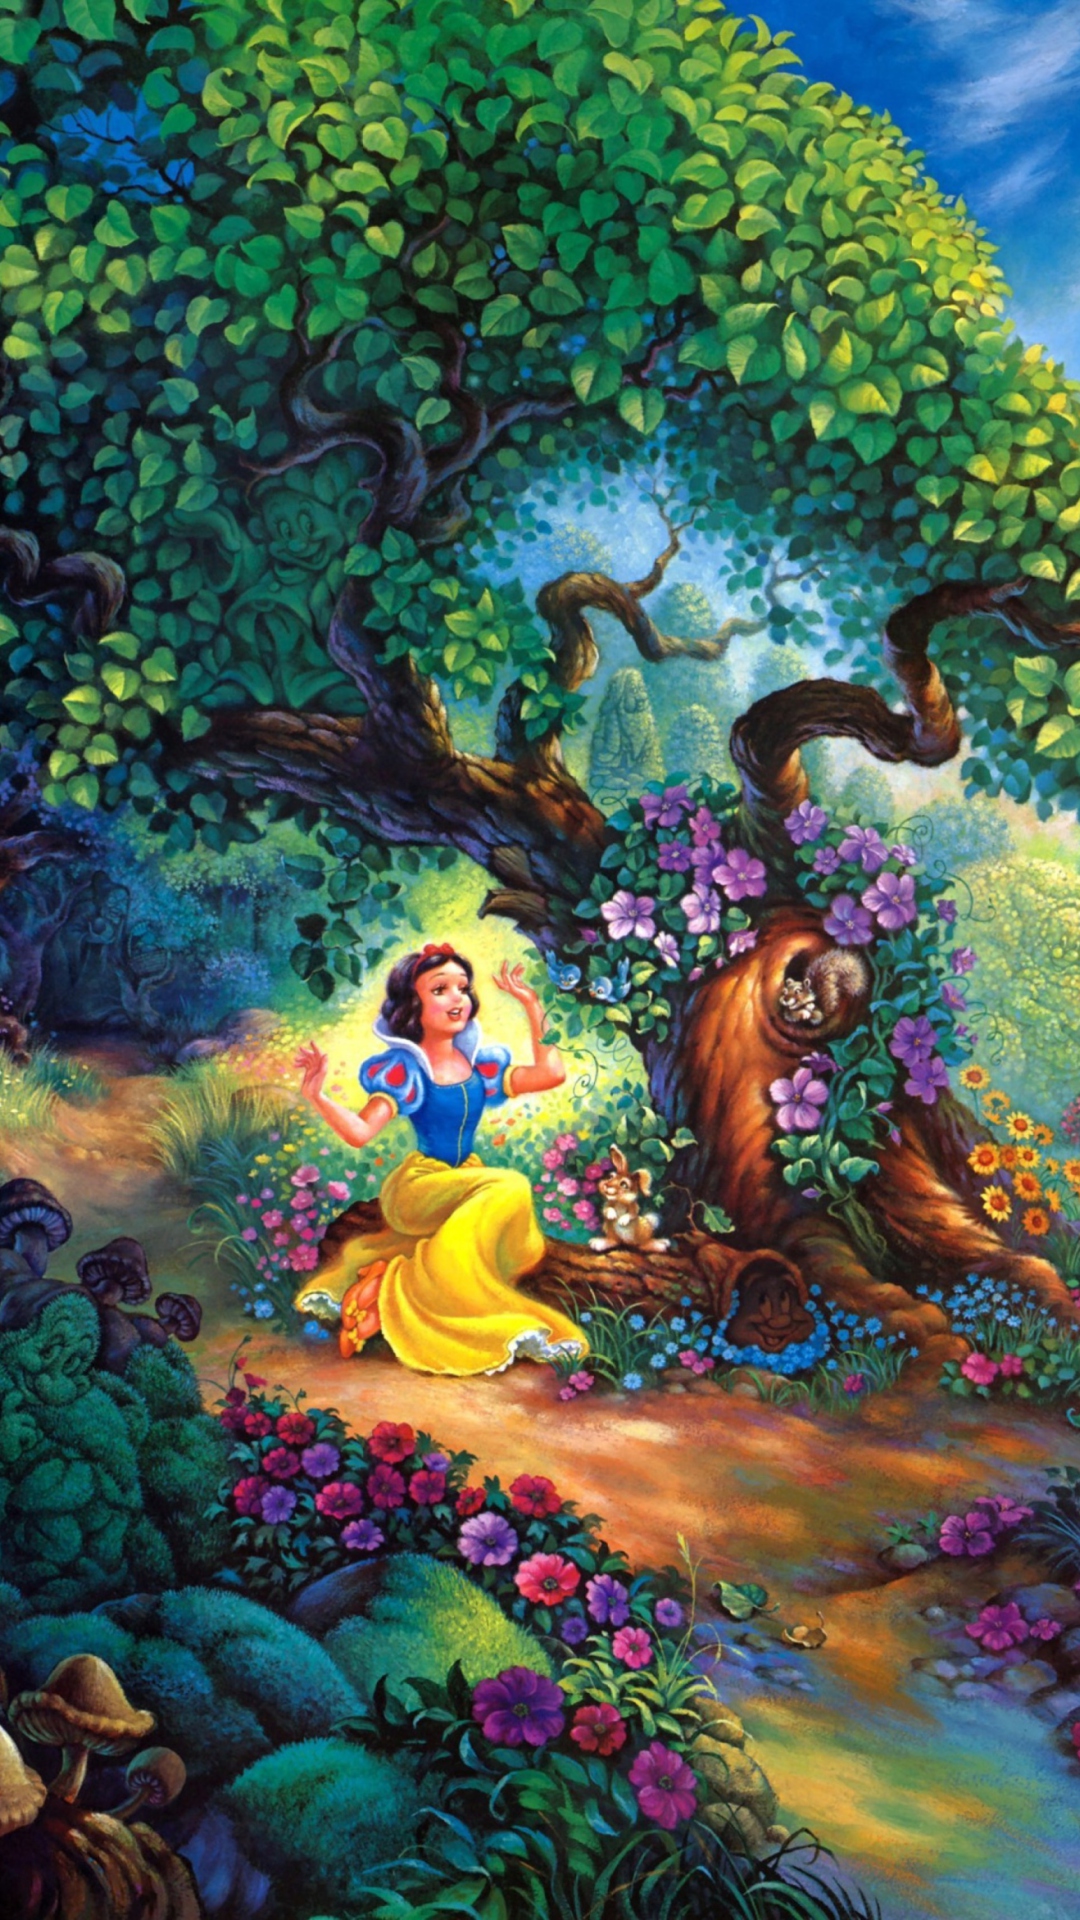 Das Snow White In Magical Forest Wallpaper 1080x1920